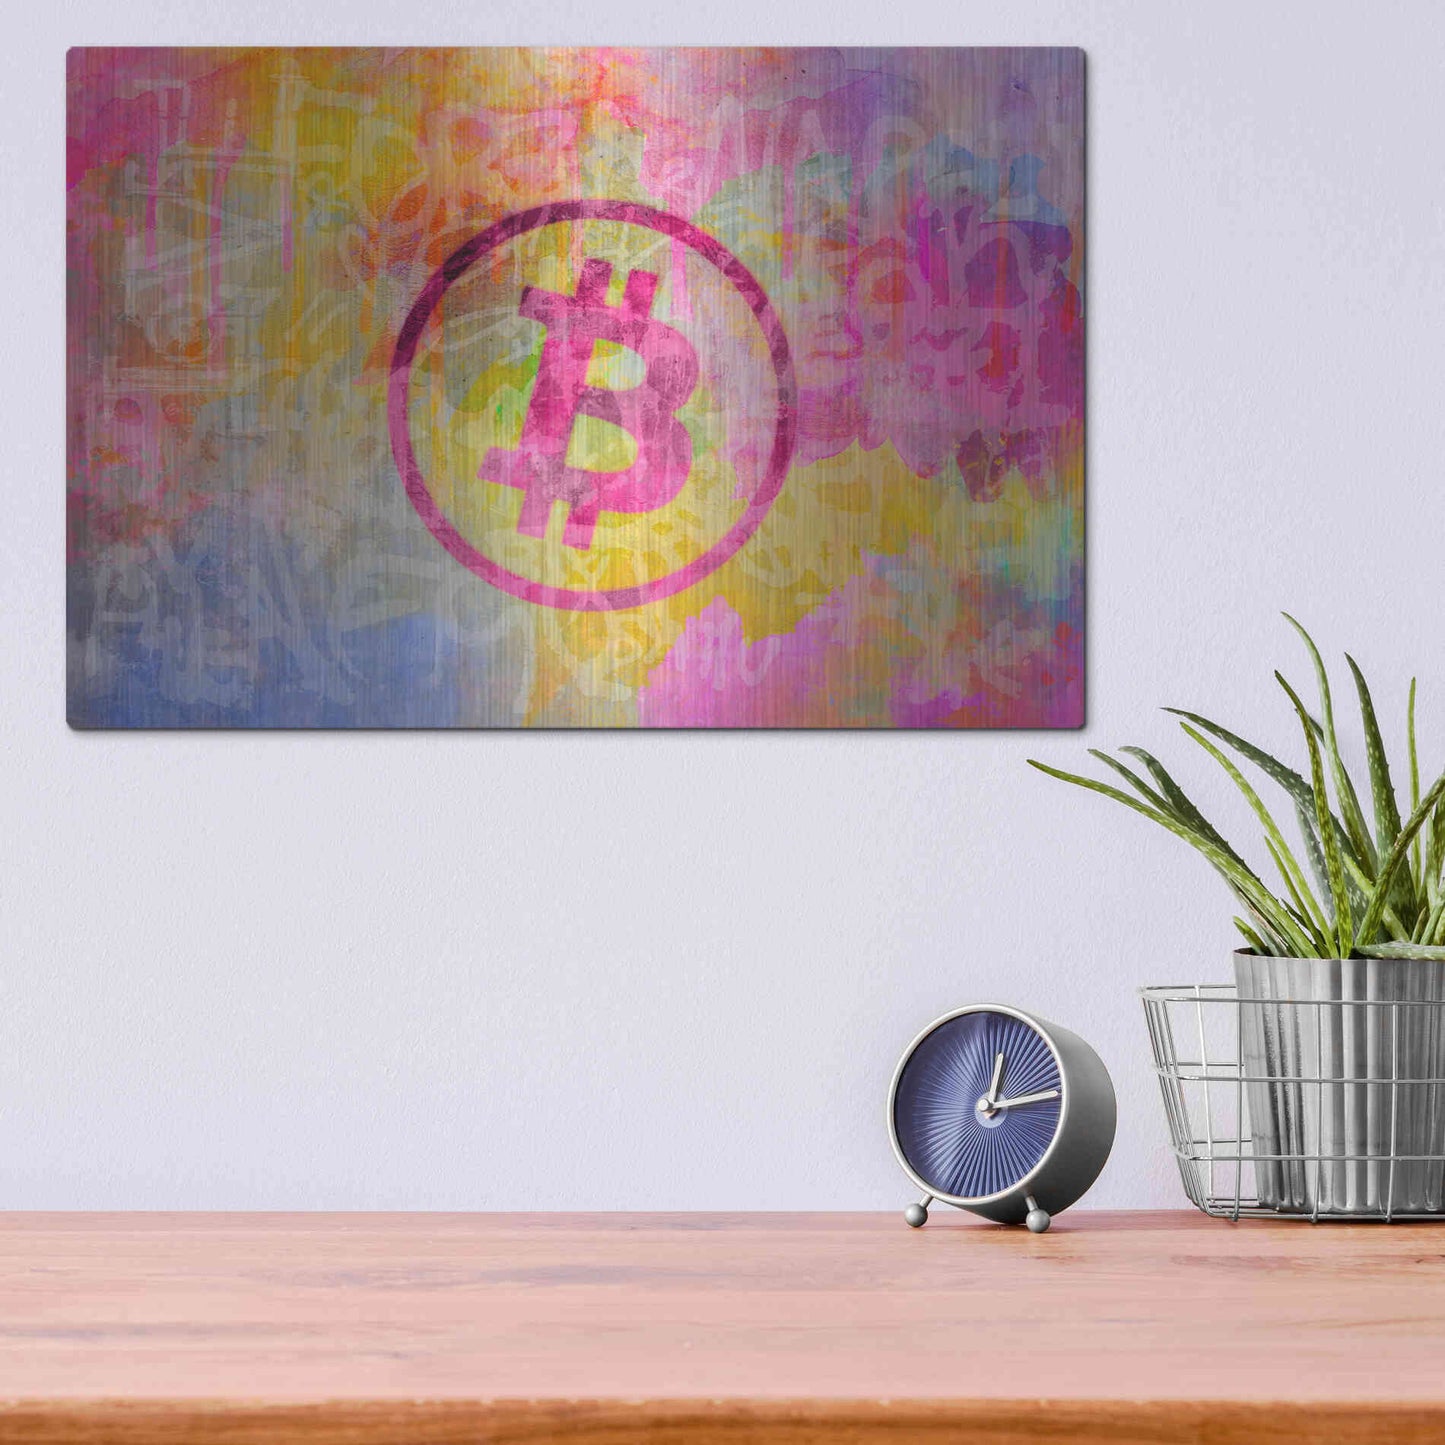 Luxe Metal Art 'Street Art Bitcoin' by Andrea Haase, Metal Wall At,16x12